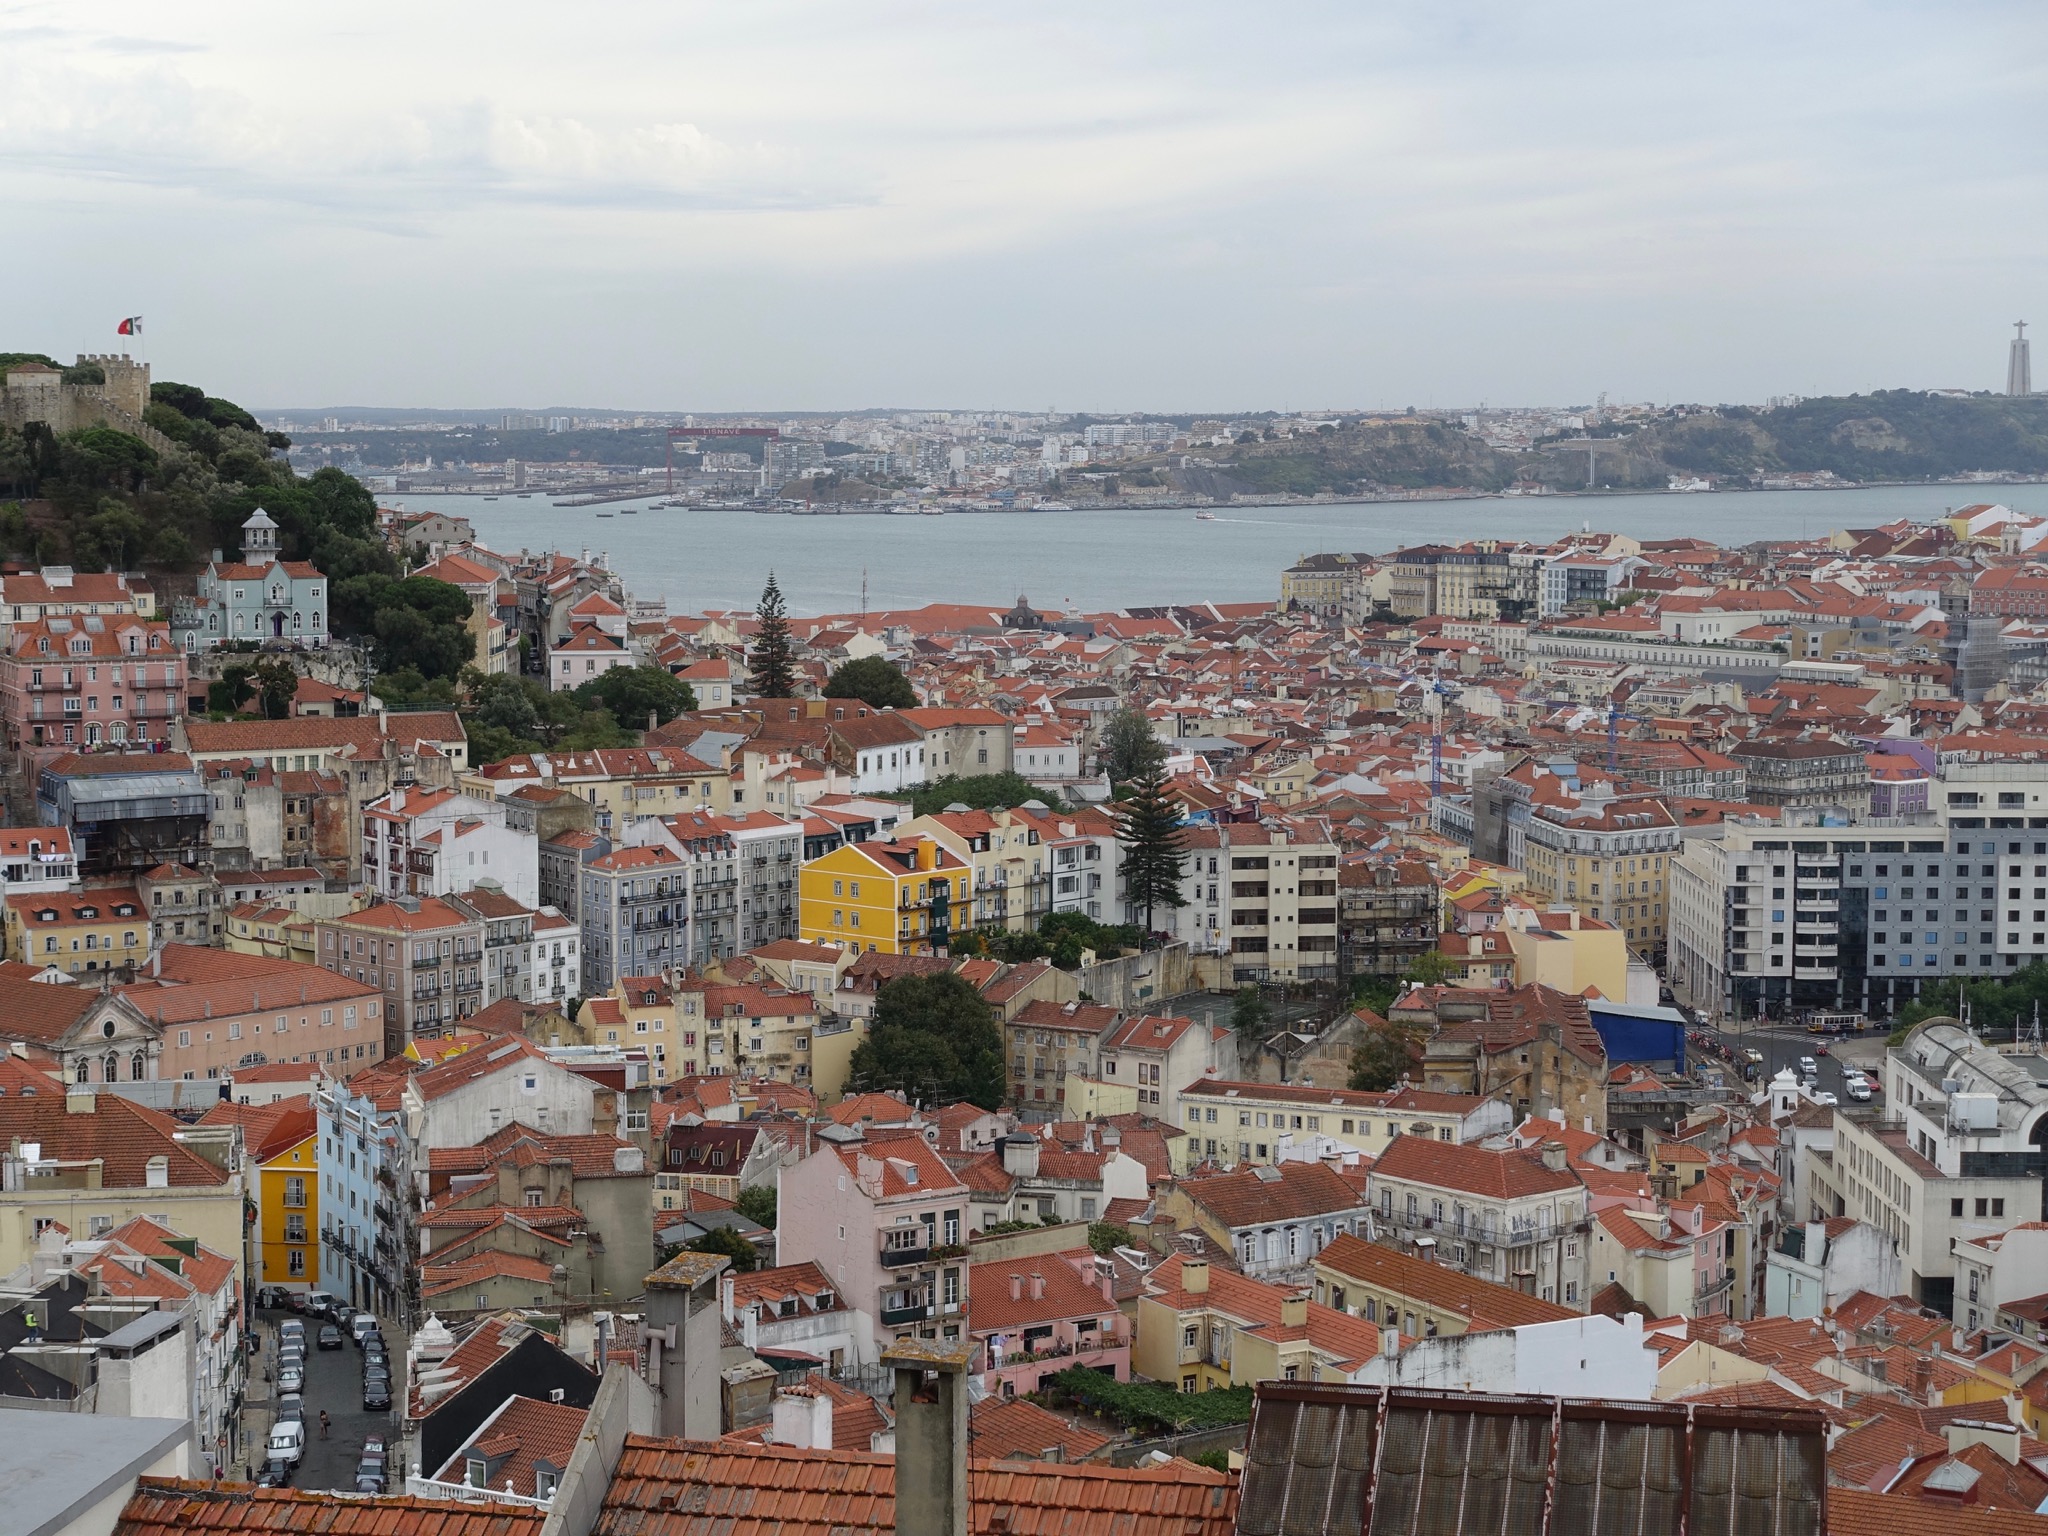 Photo 10 of 86 from the album Highlights Lisbon 2015.